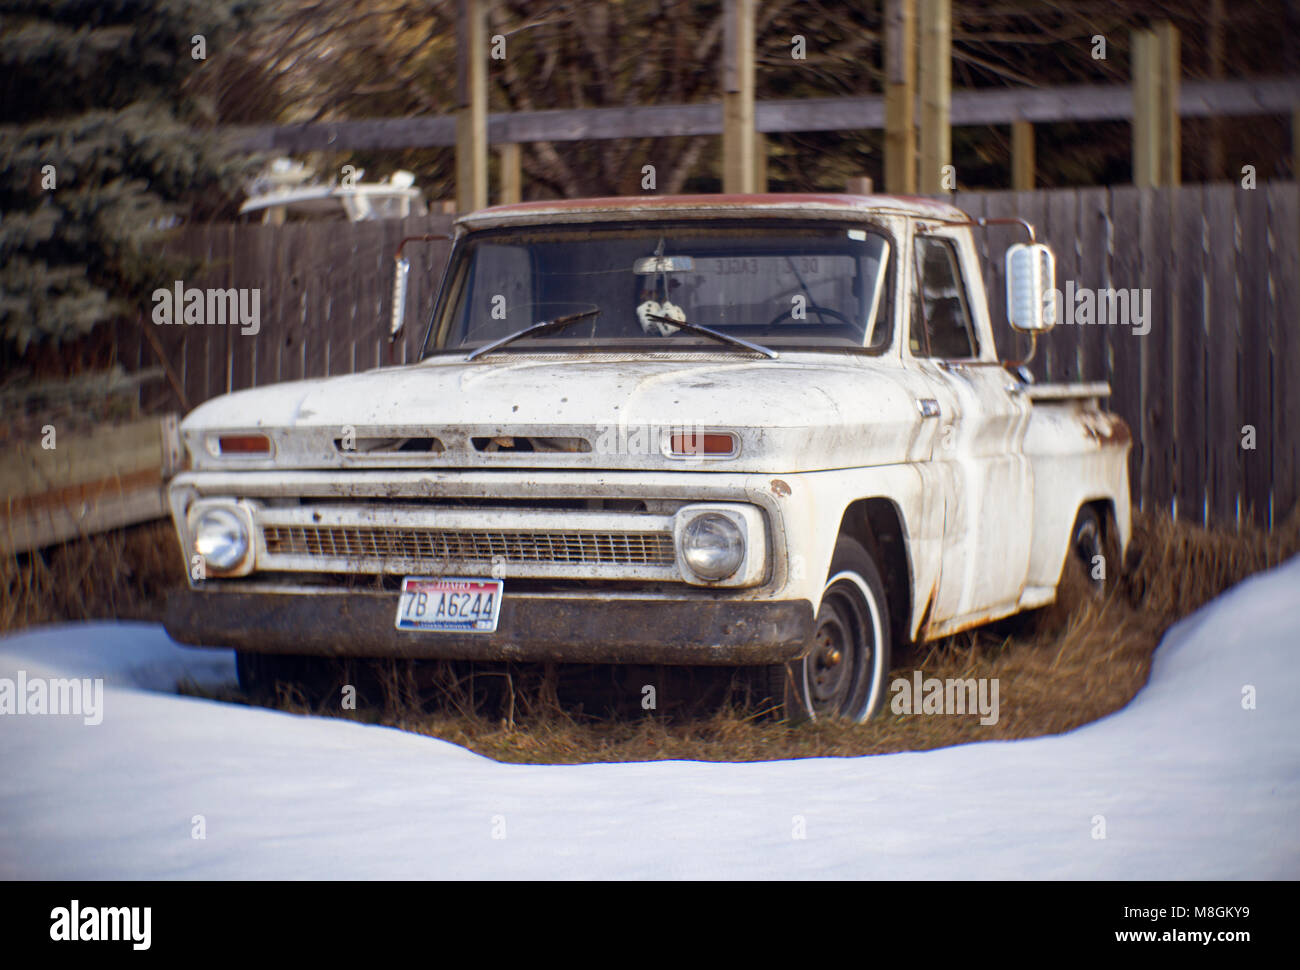 A white 1965 C10 Chevrolet pickup truck in the snow, in the town of Clark Fork, Bonner County, Idaho. Stock Photo